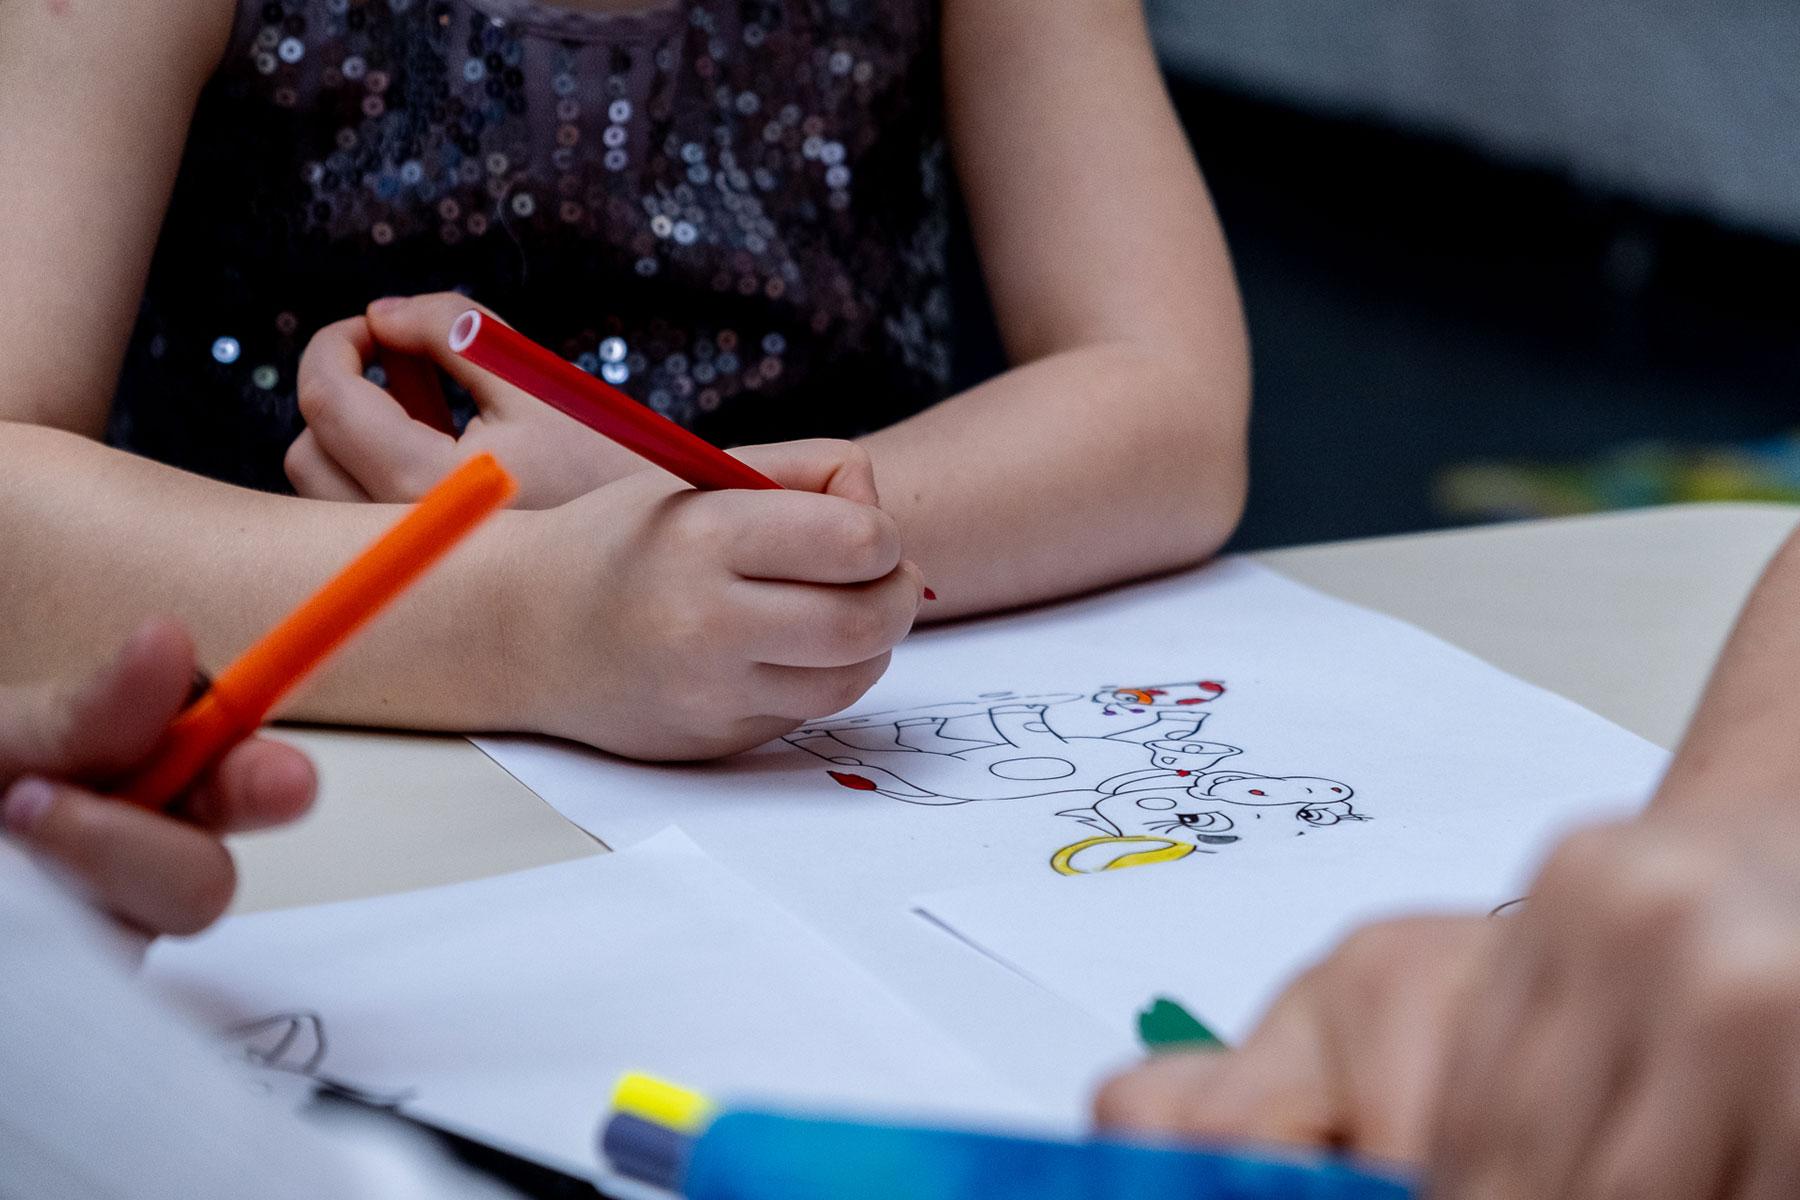 The Dévai Fogadó community center provides Ukrainian refugees with services including children’s camps and art therapy. Photo: ELCH